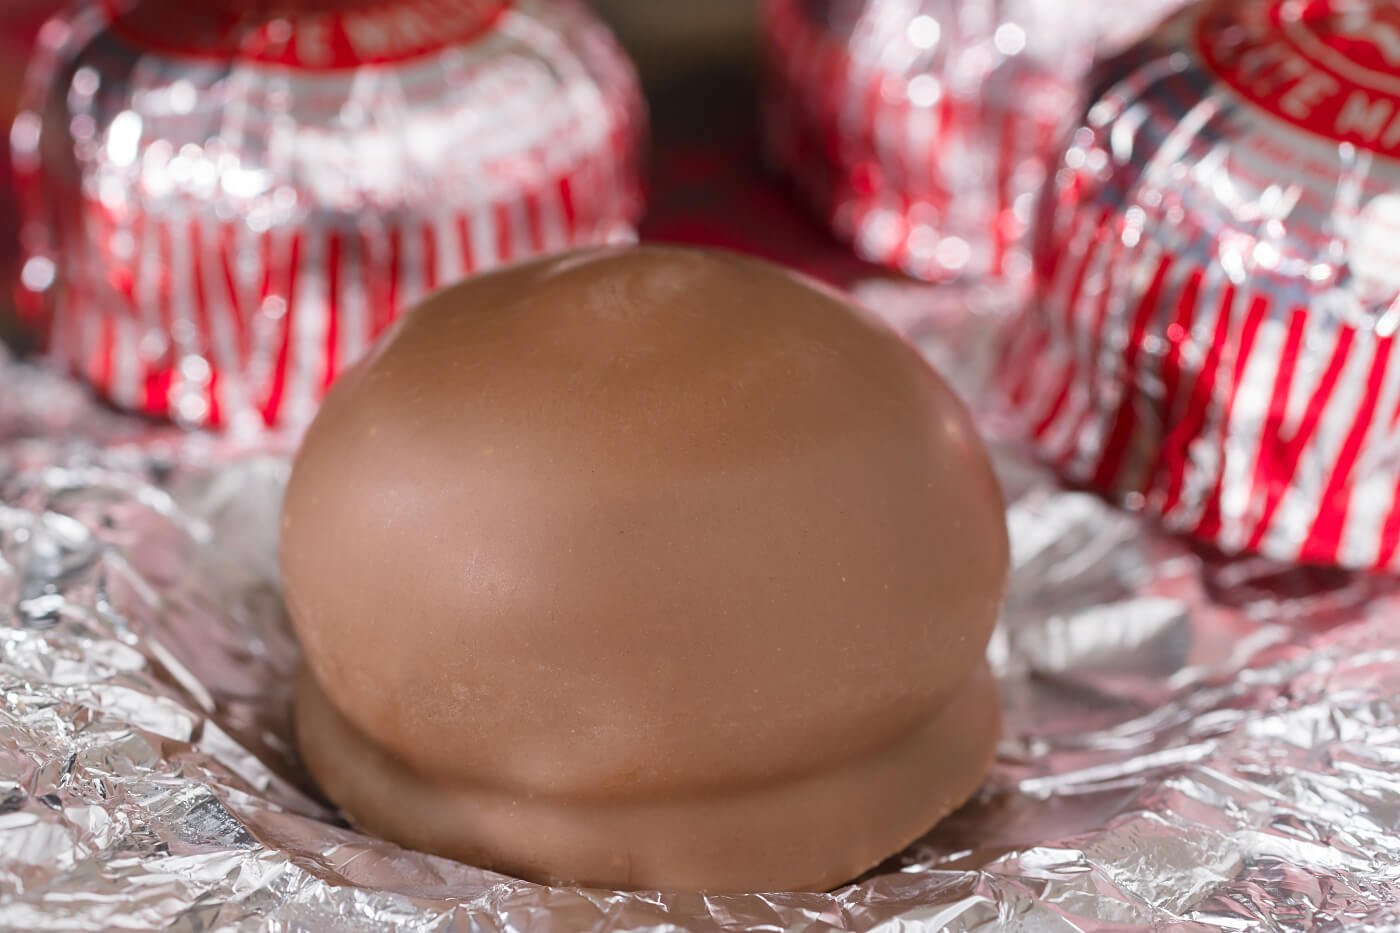 Close-up of an unwrapped Tunnock's Teacake, with wrapped teacakes in the background.